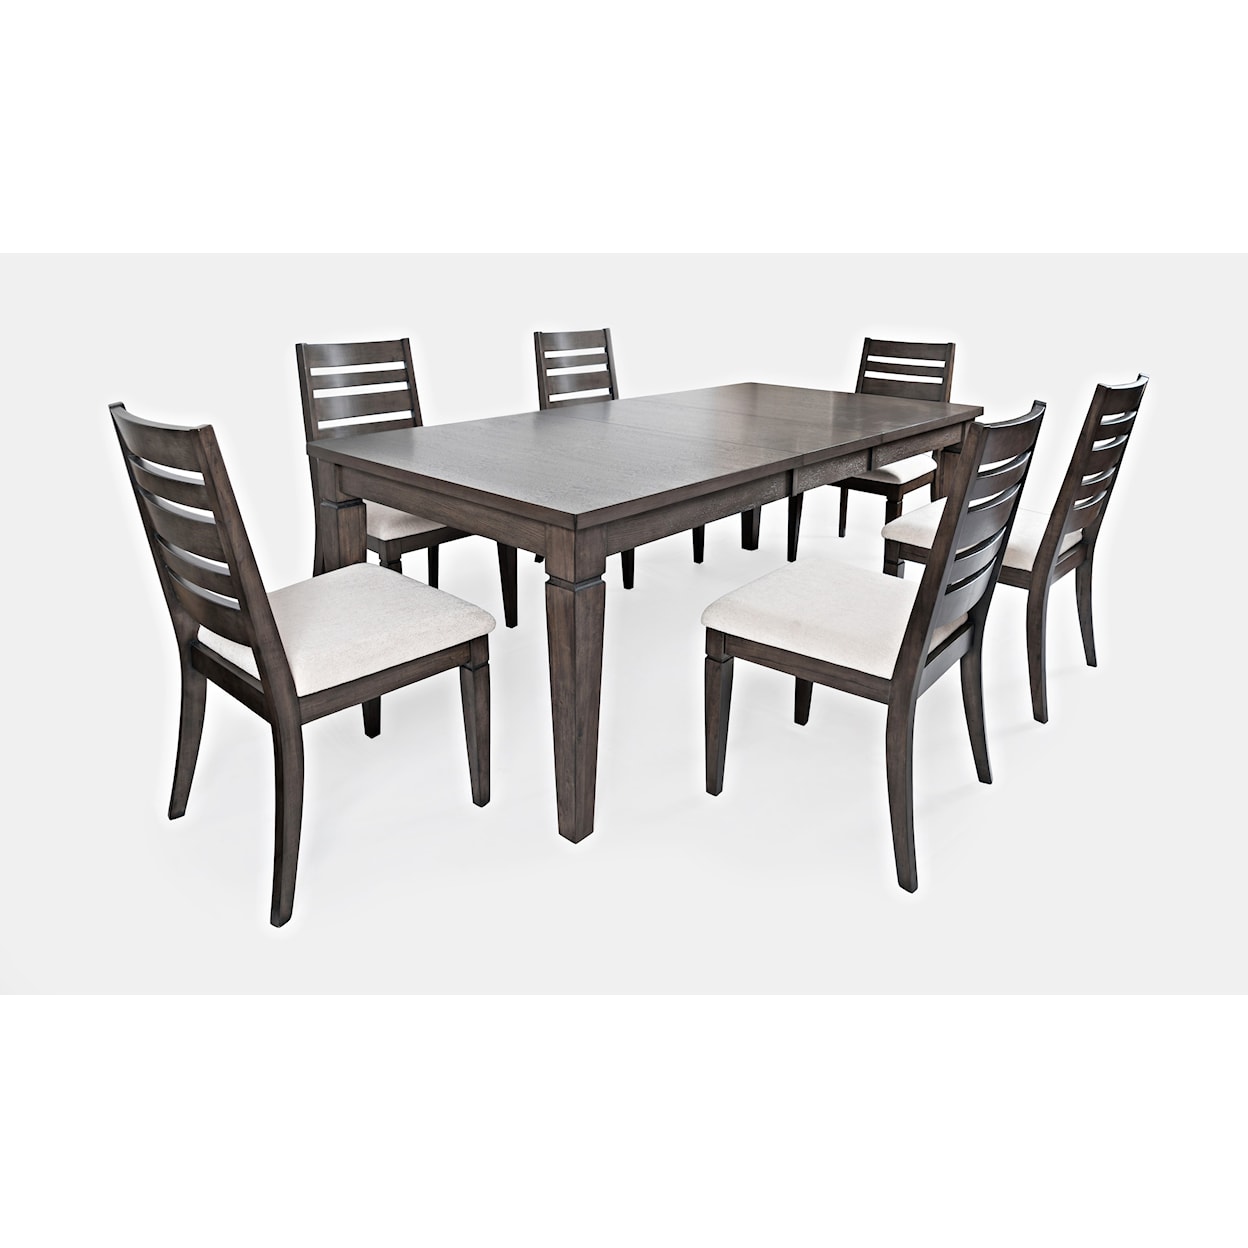 Jofran Lincoln Square 7pc Dining Room Group